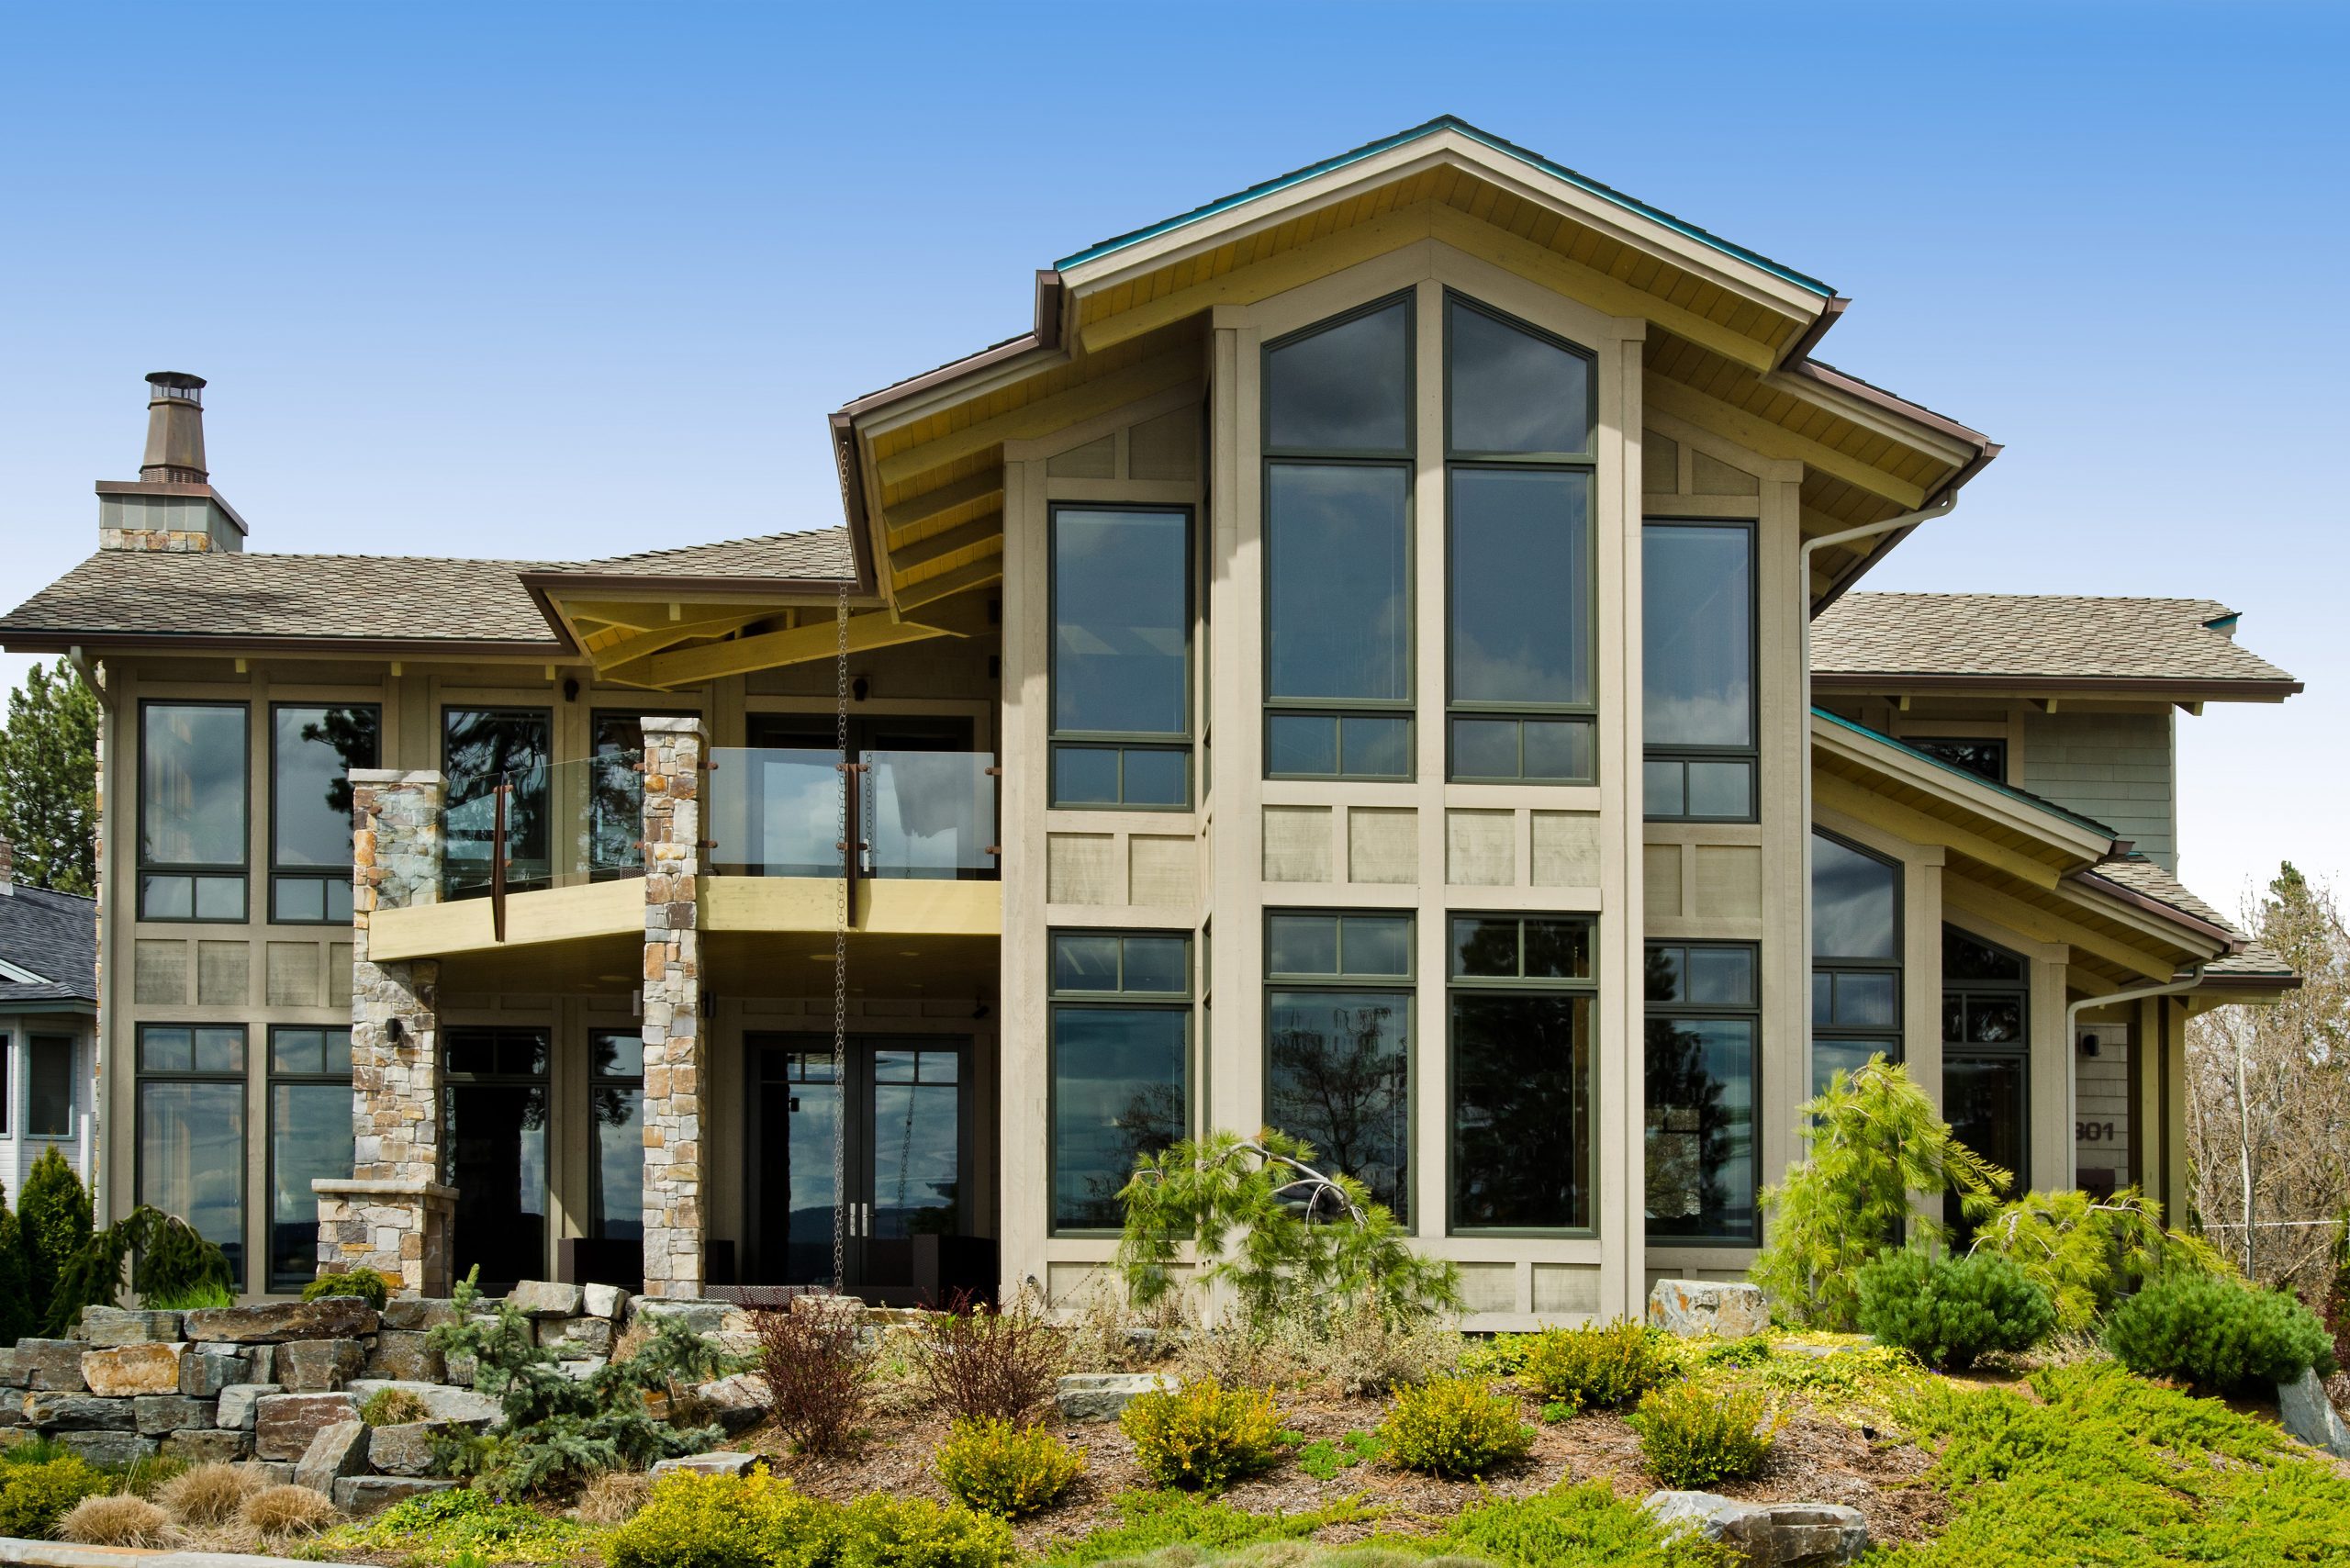 Fort Grounds Residence is a custom home located in downtown Coeur d'Alene, Idaho. The home features a multitude of windows capturing the views of Coeur d'Alene Lake just across the street.